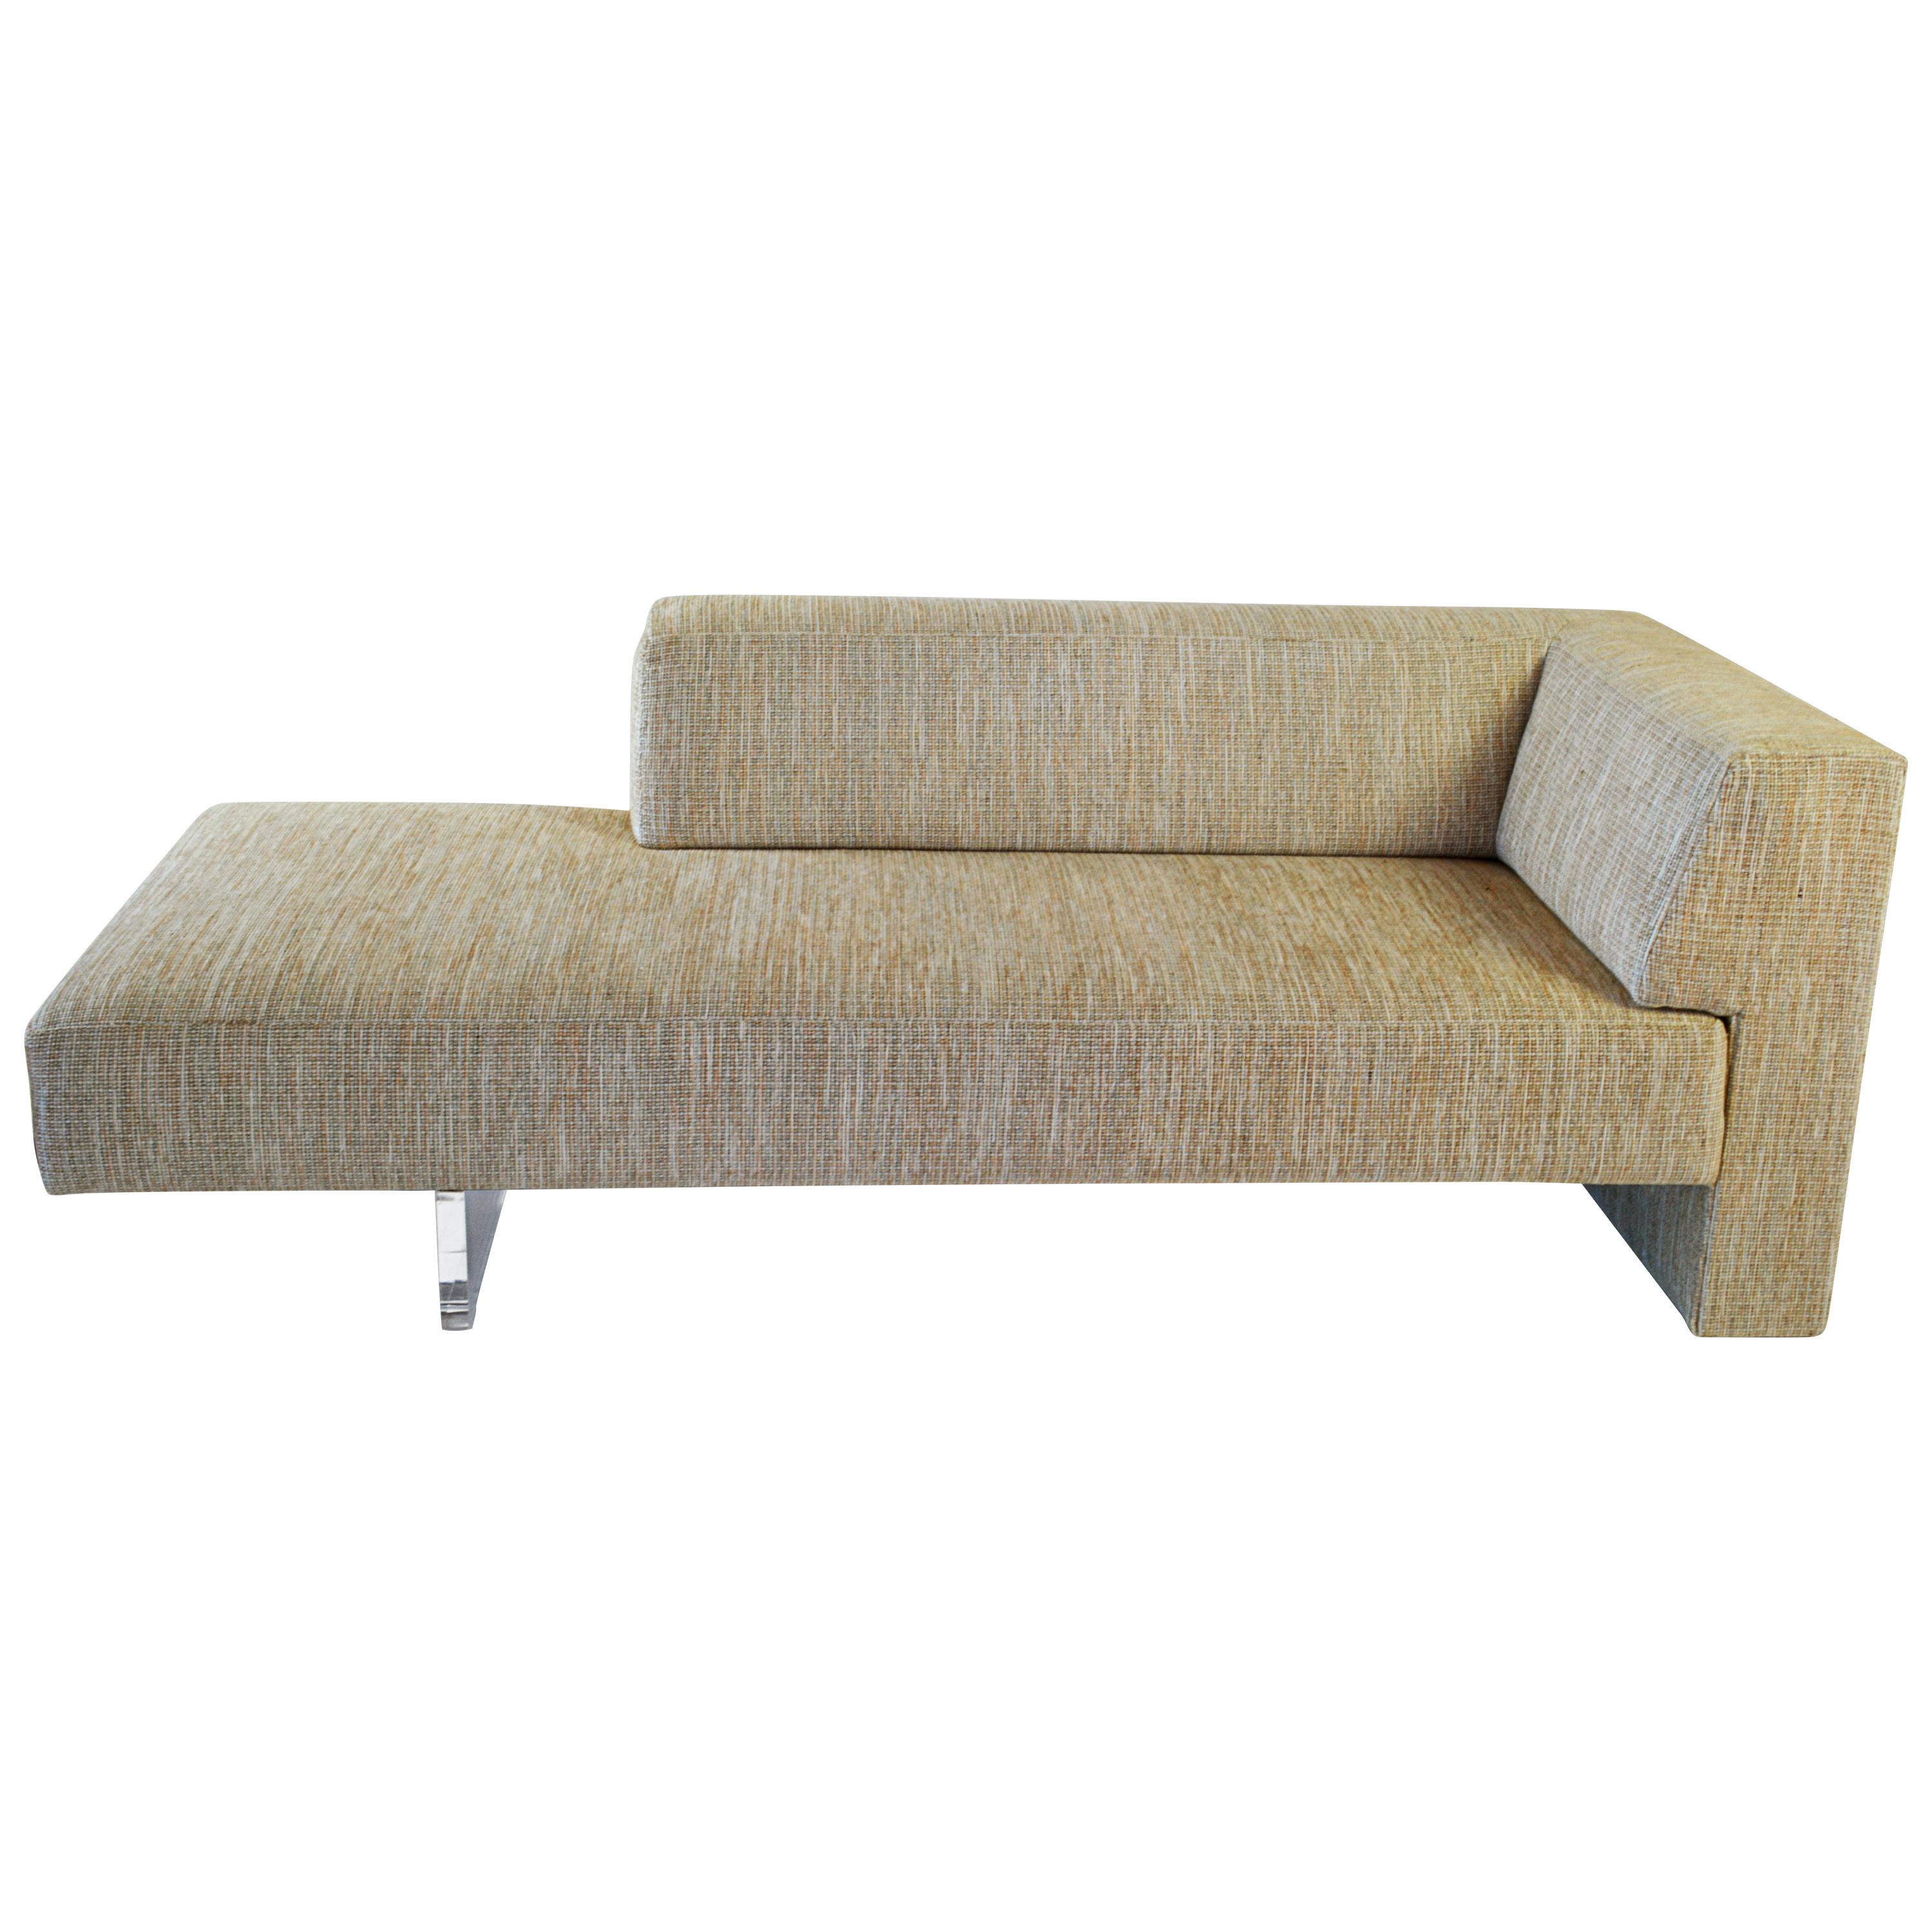 Vladimir Kagan Omnibus I One Arm Loveseat in Upholstered Seat with Lucite Base